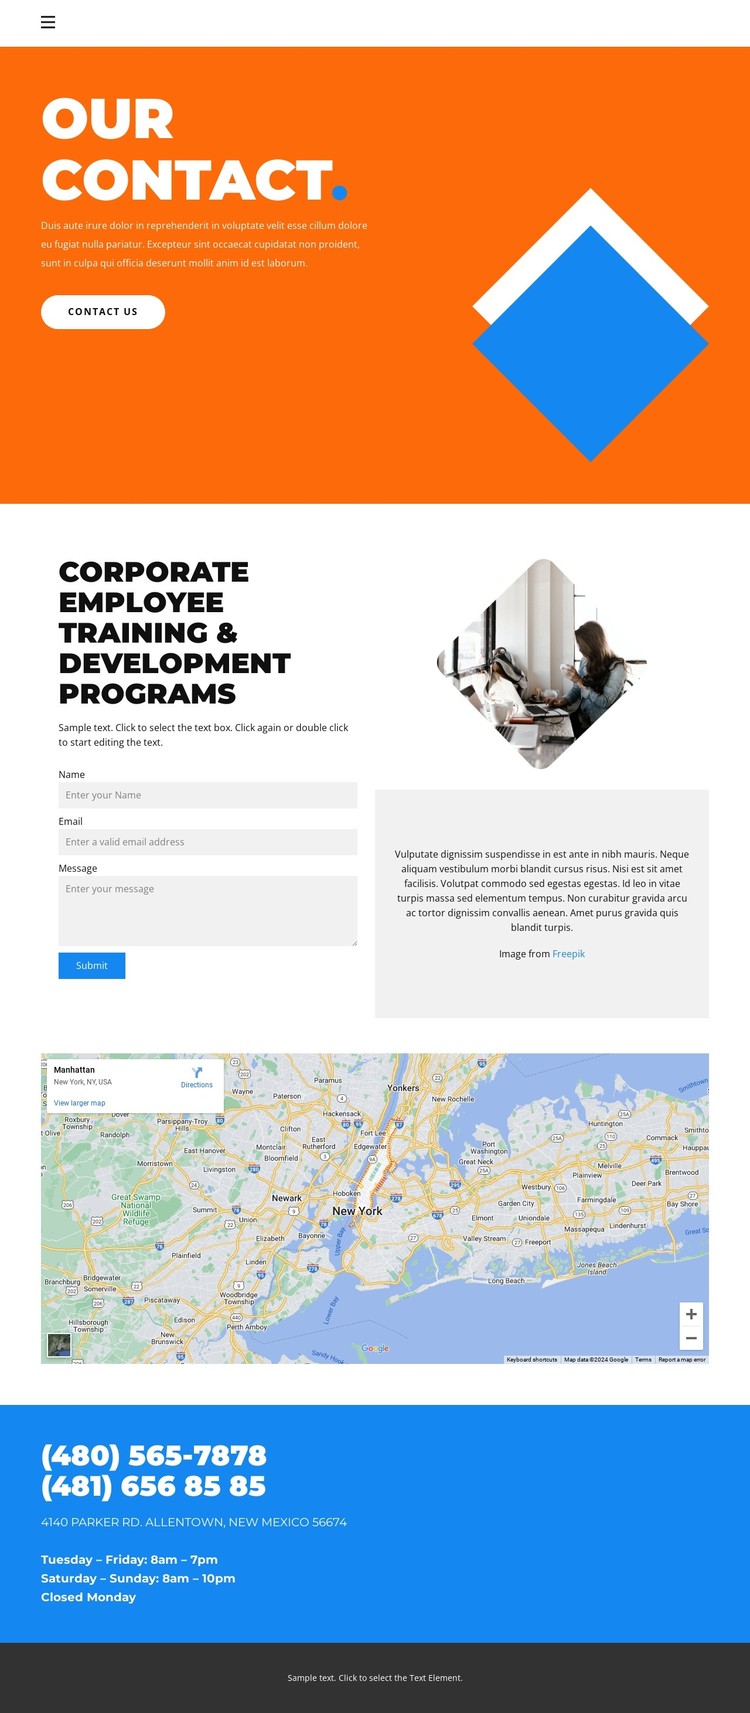 Design agency contacts Static Site Generator